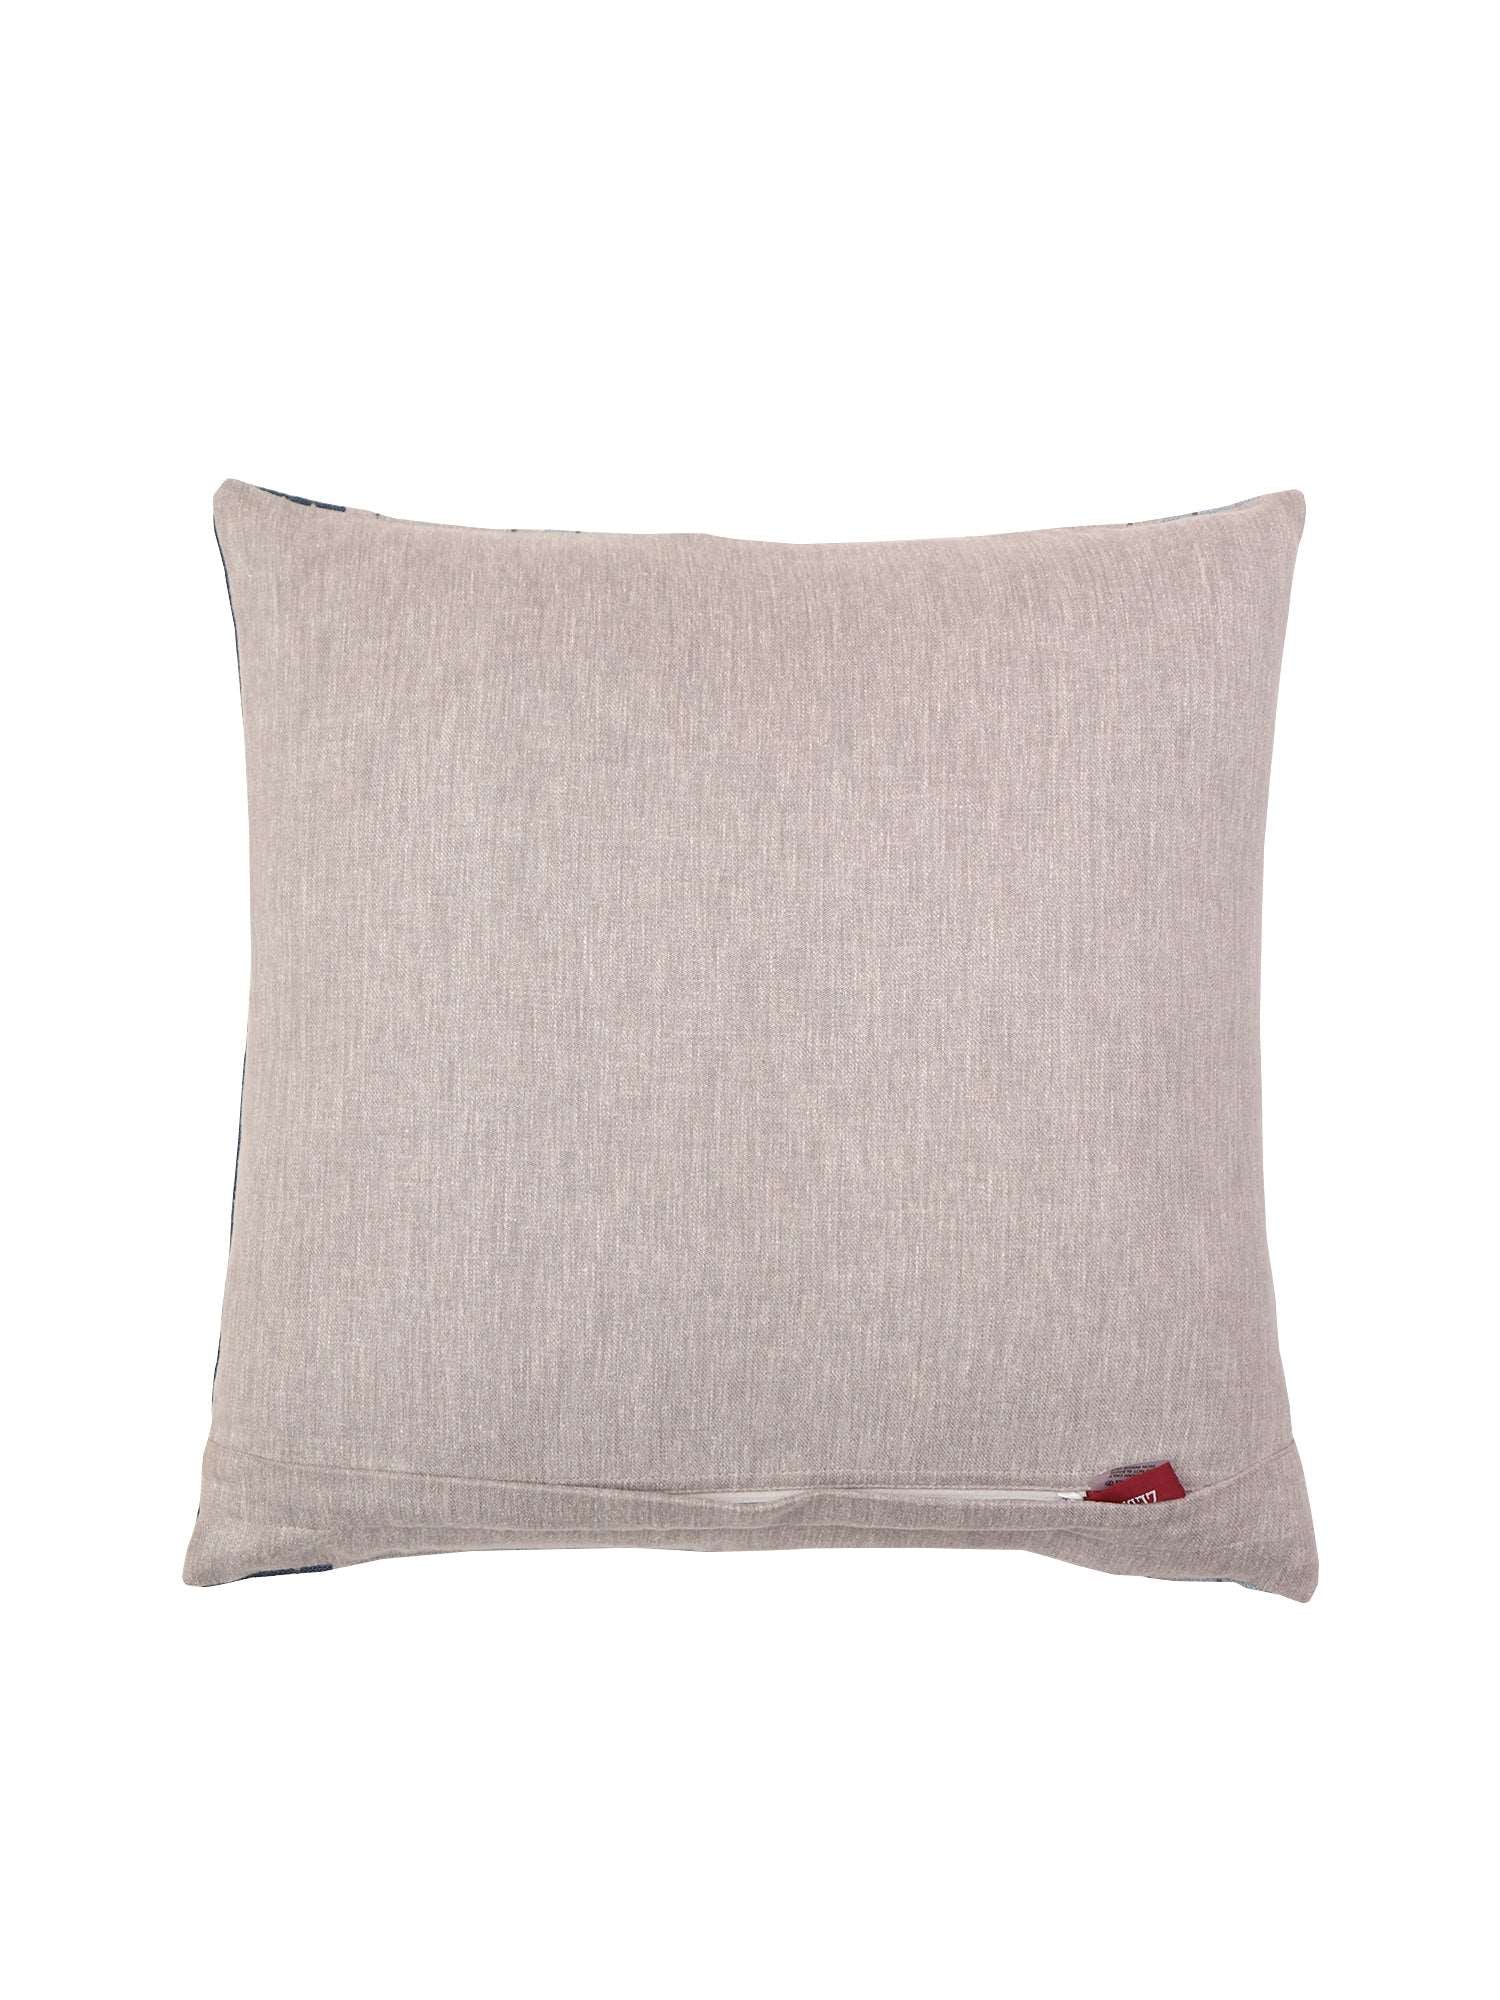 Cushion Cover Cotton Blend Patchwork with Embroidery of Chawal Taka Multi - 16inches X 16inches